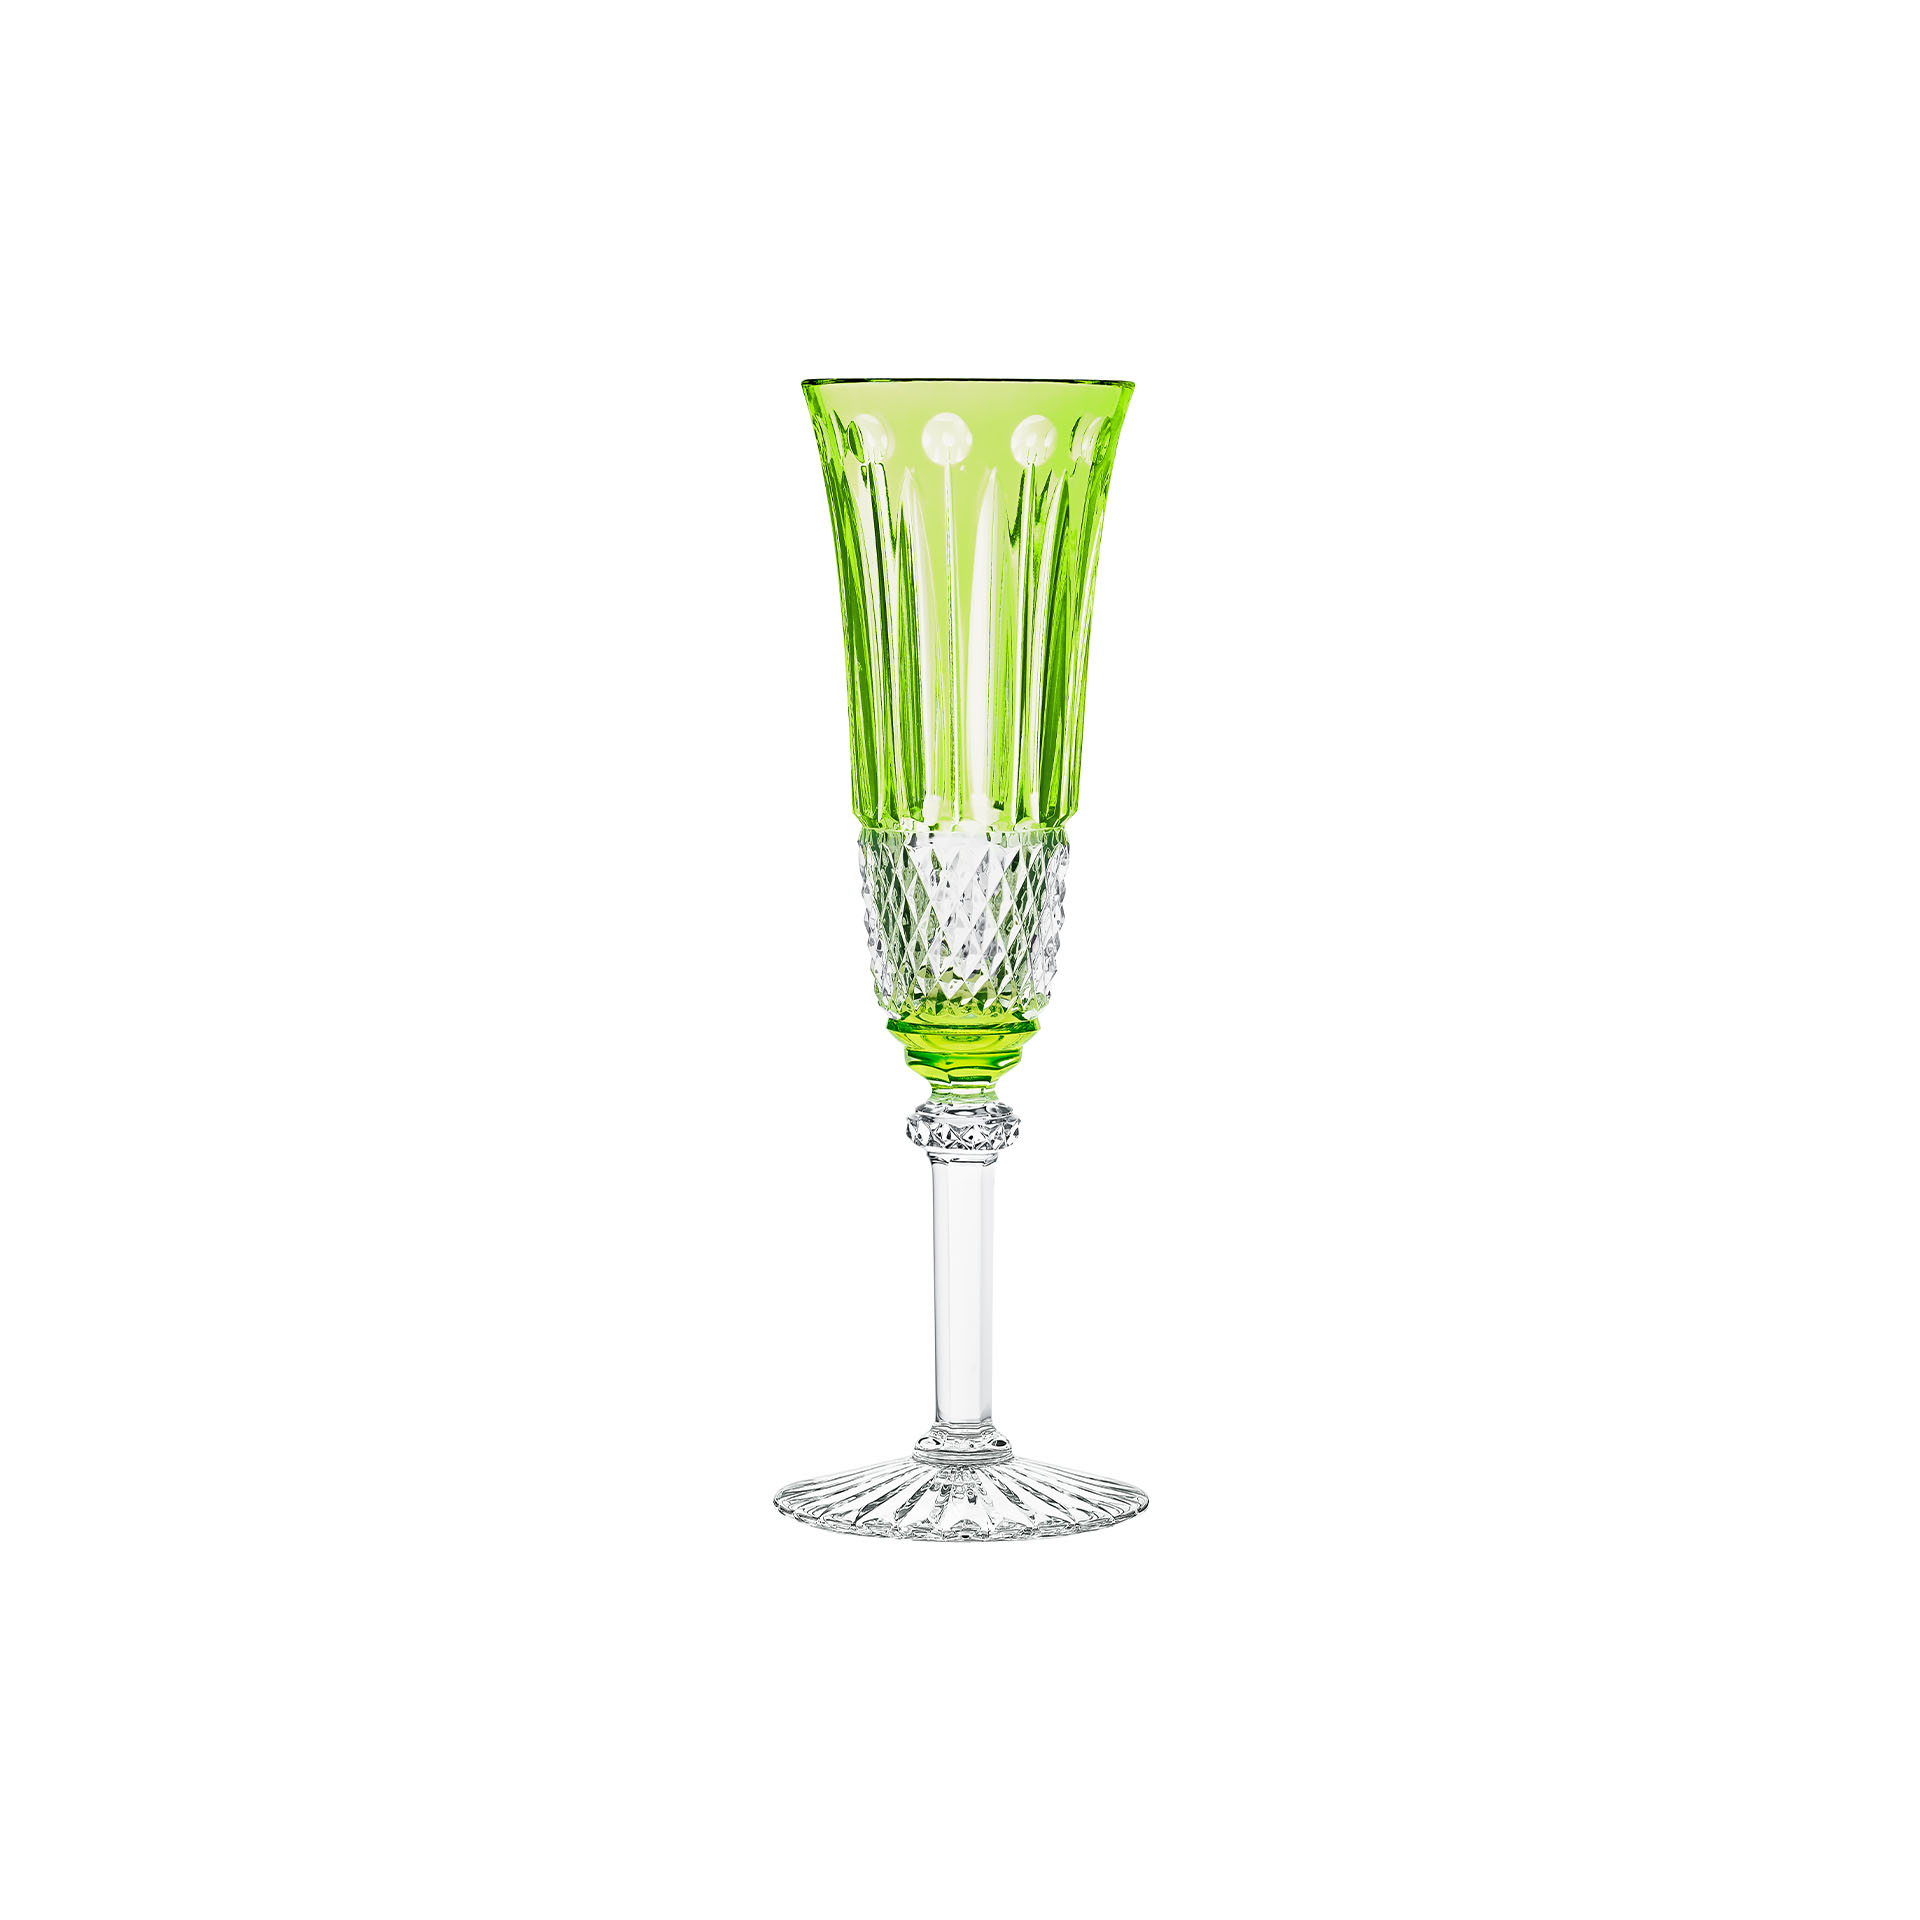 Tommy Chartreusegreen Champagne flute Saint-Louis